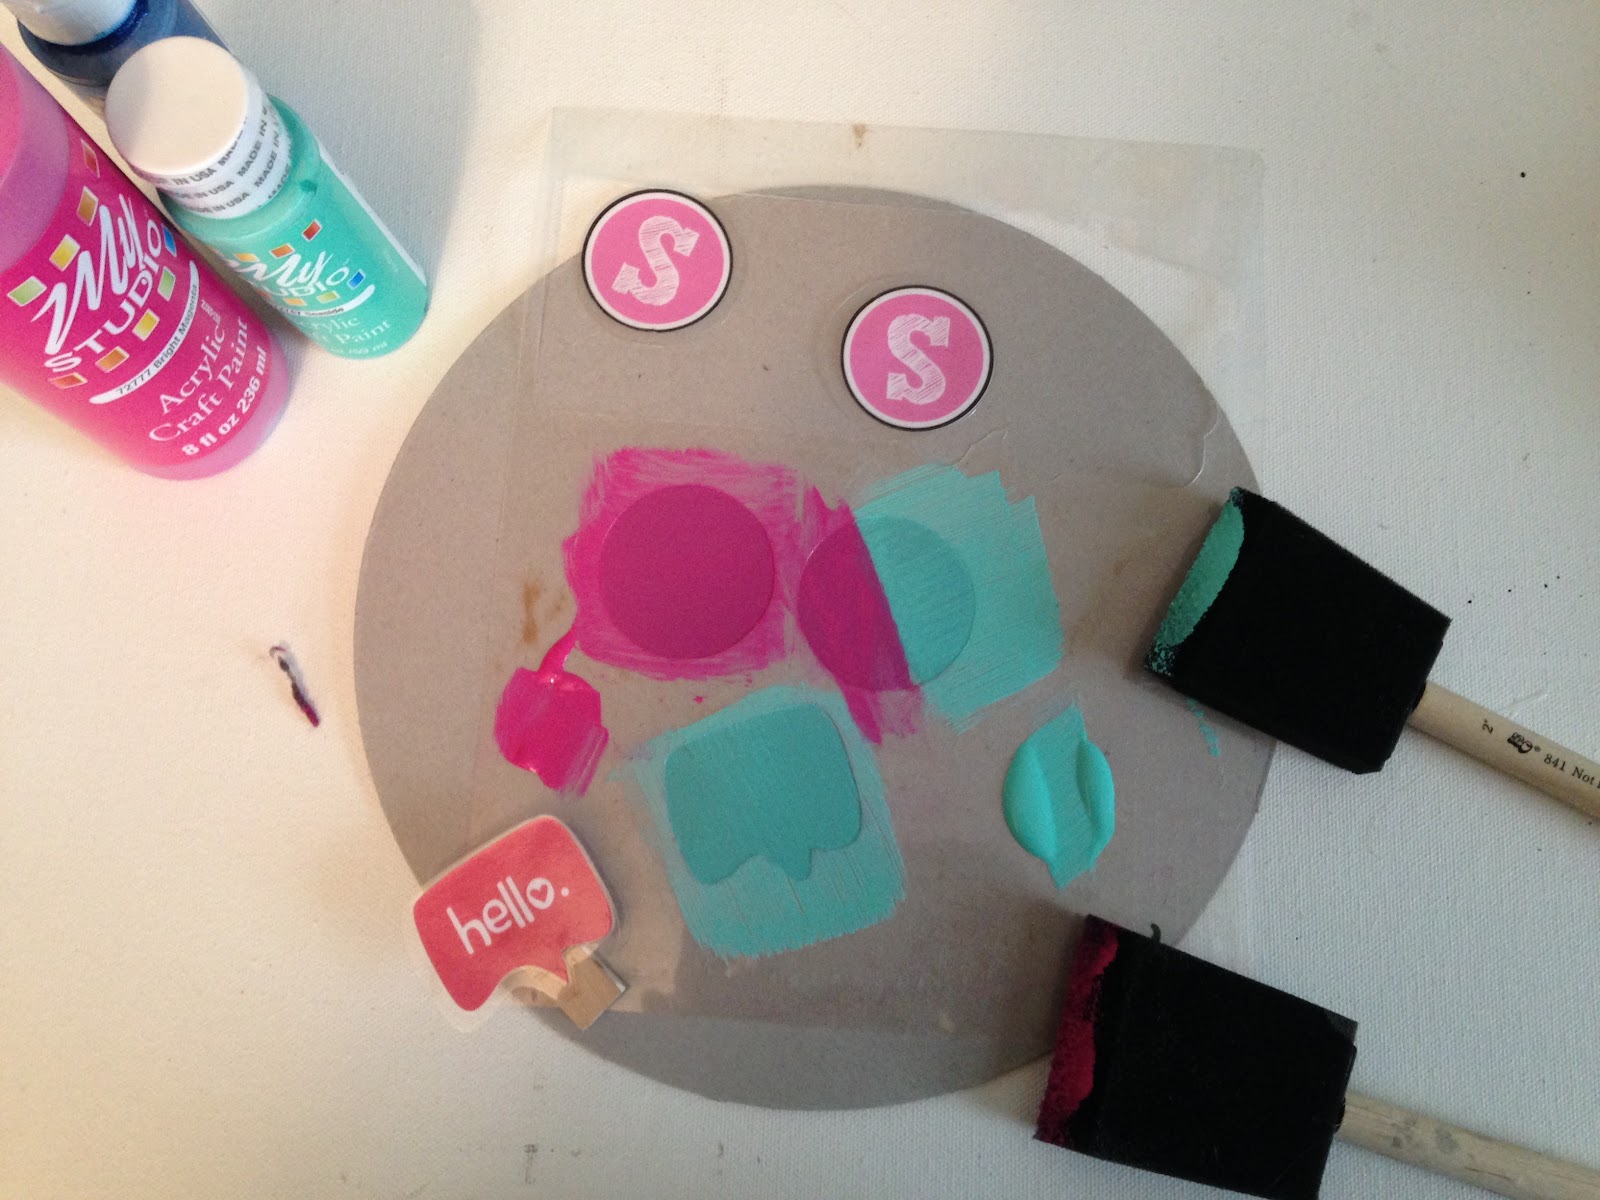 Dollar Store Hacks: Silhouette Cutting Mats and DIY Stencils!!!